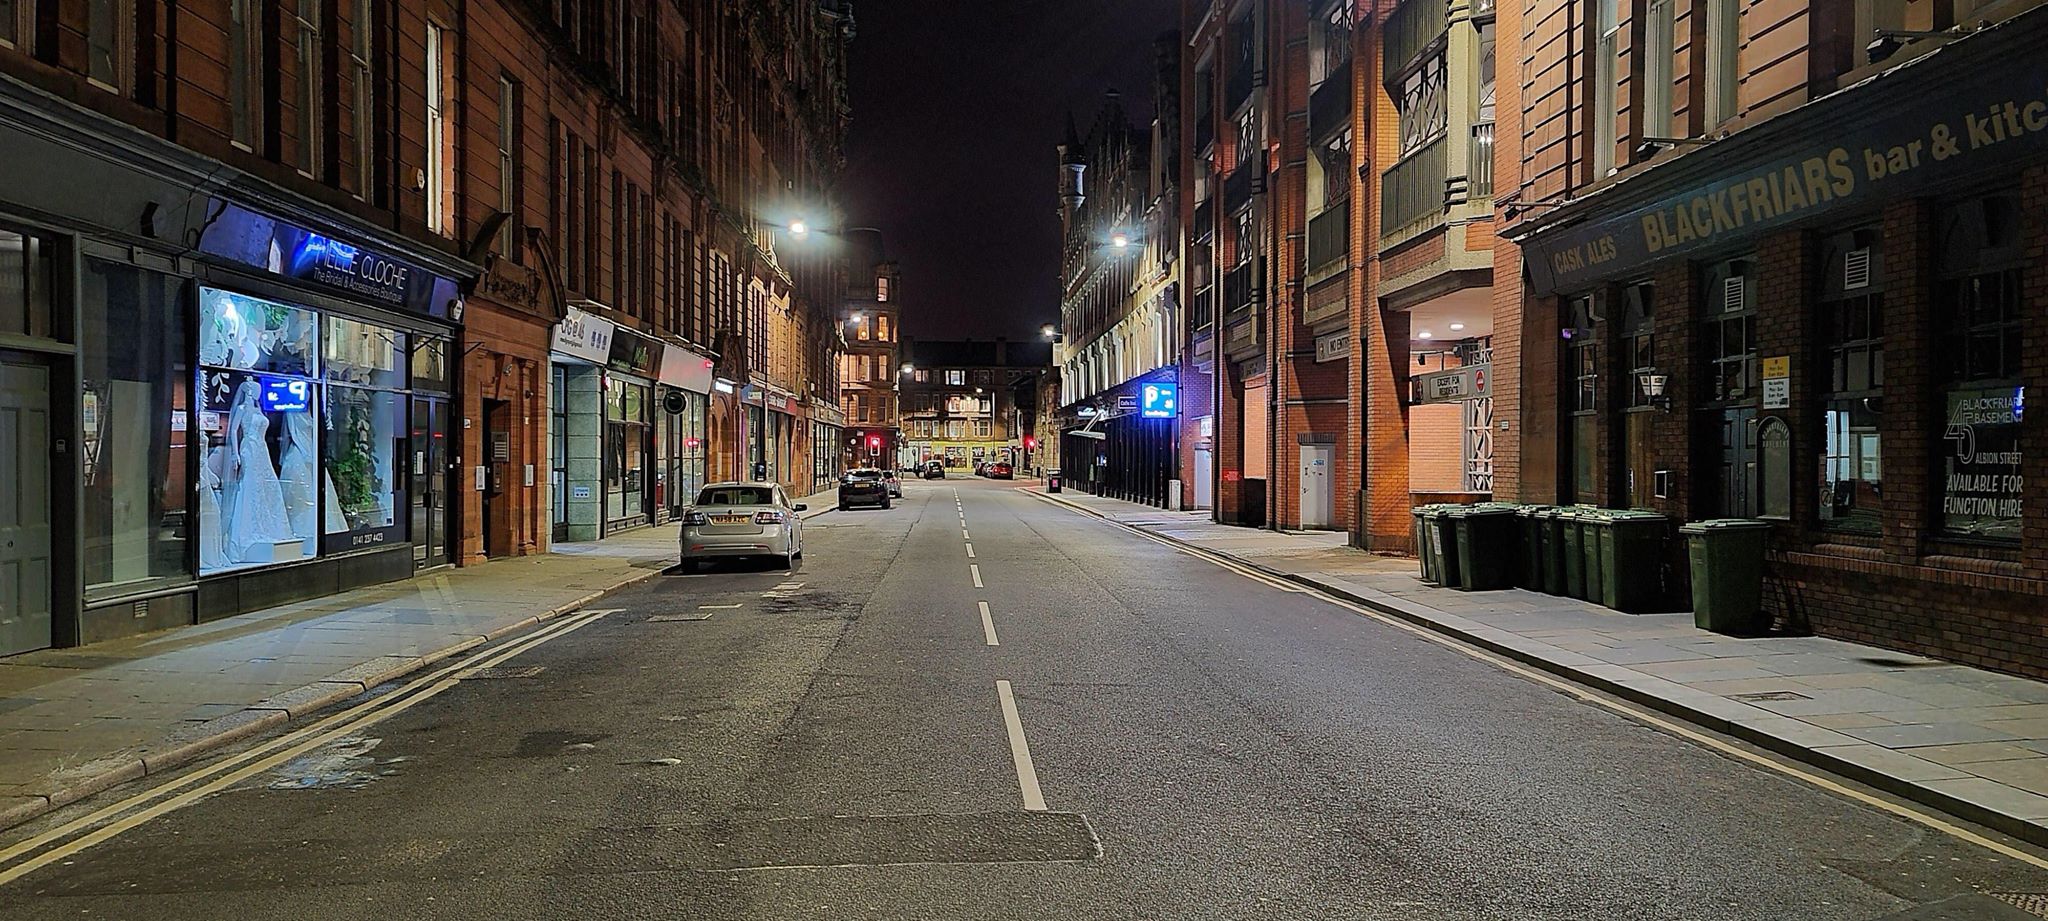 Saturday: Late-night revellers stayed away from the city centre.